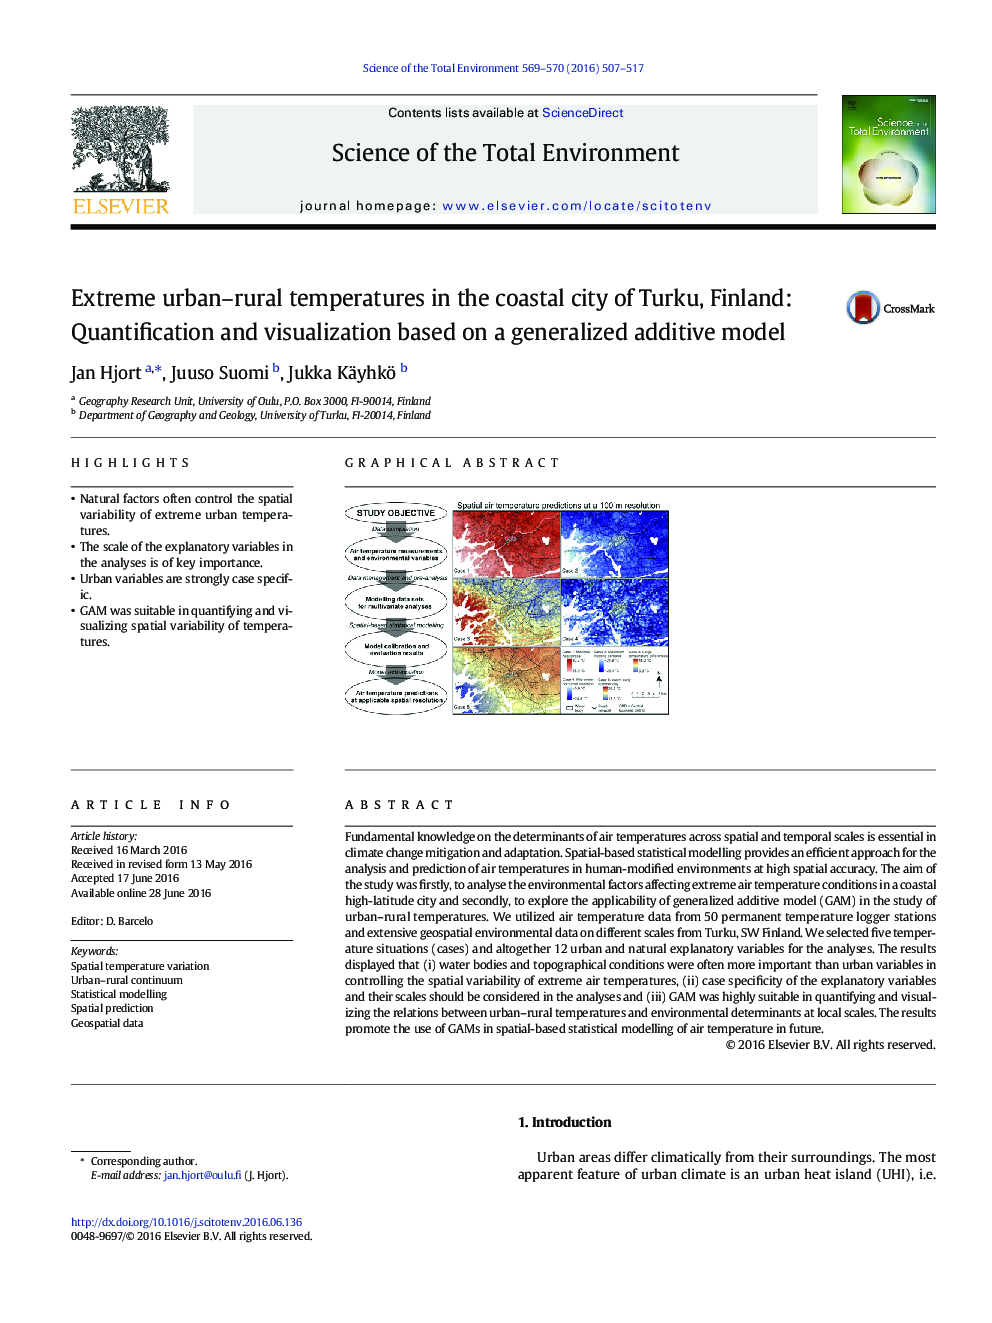 Extreme urban-rural temperatures in the coastal city of Turku, Finland: Quantification and visualization based on a generalized additive model